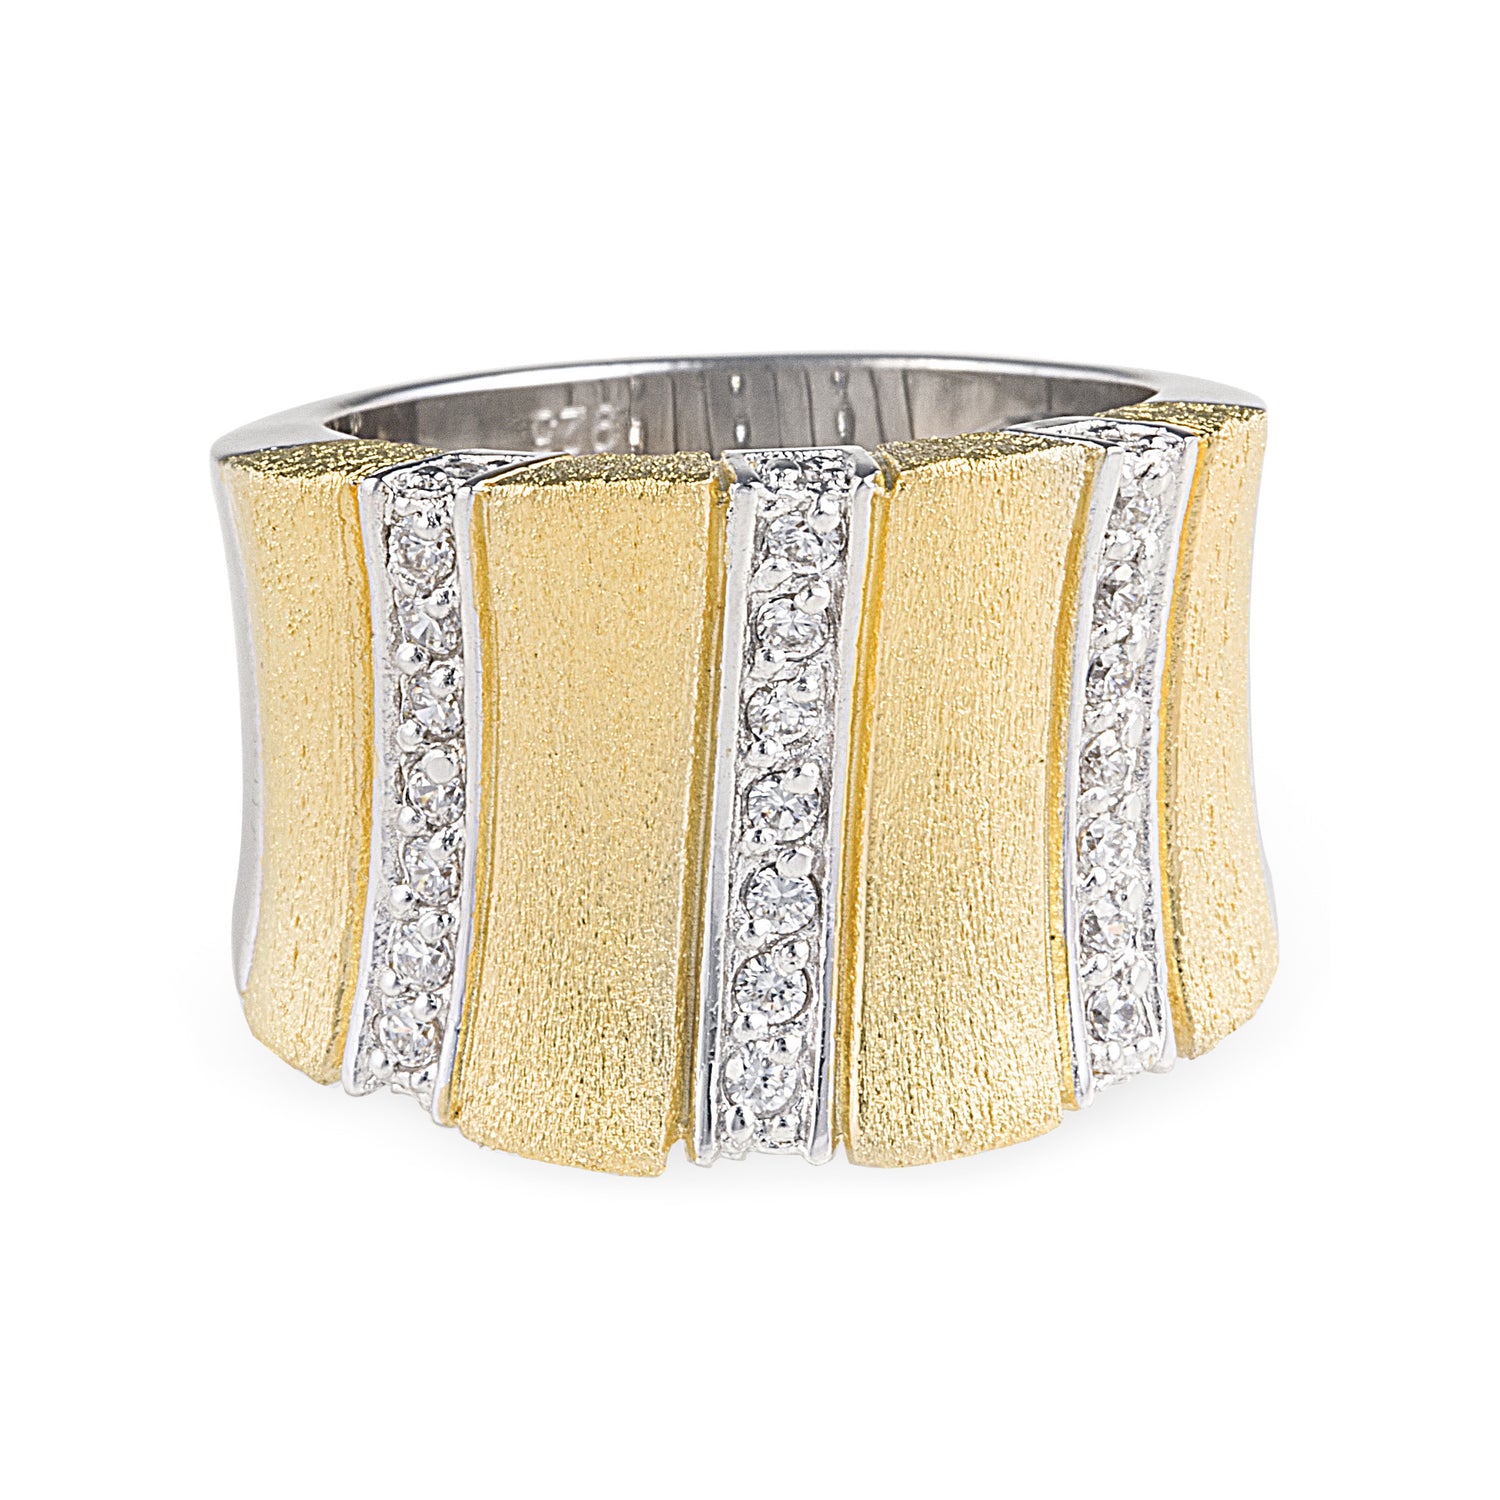 Gold Fusion Ring in 925 sterling silver with brushed gold overlay in a mix of gold and silver with 3 rows of cubic zirconia. Worldwide shipping. Affordable luxury jewellery by Bellagio & Co.